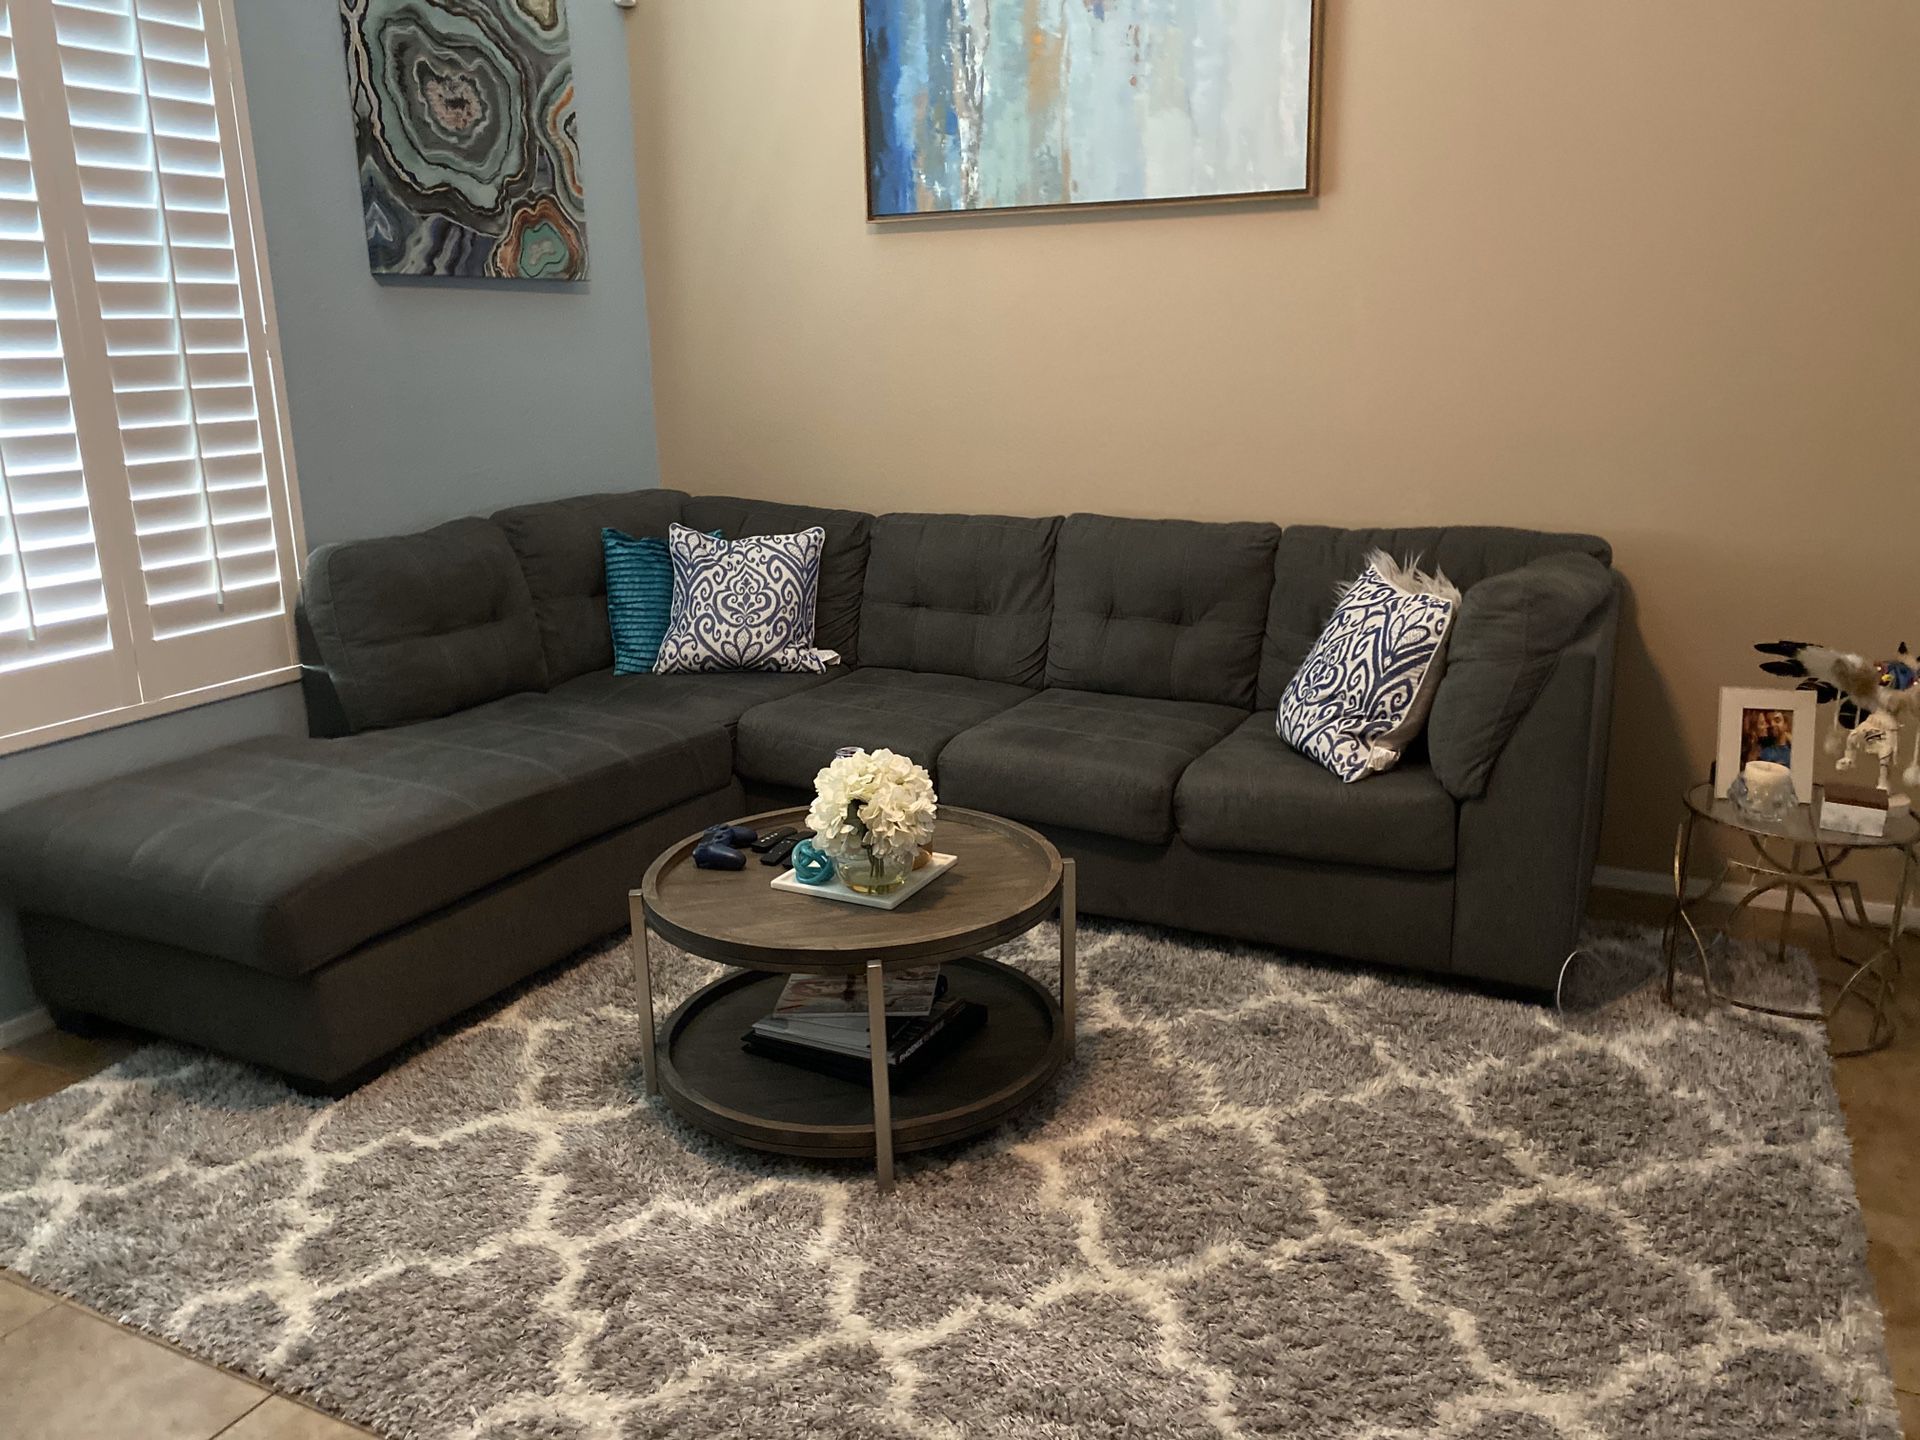 Blue /grey sectional couch from living spaces